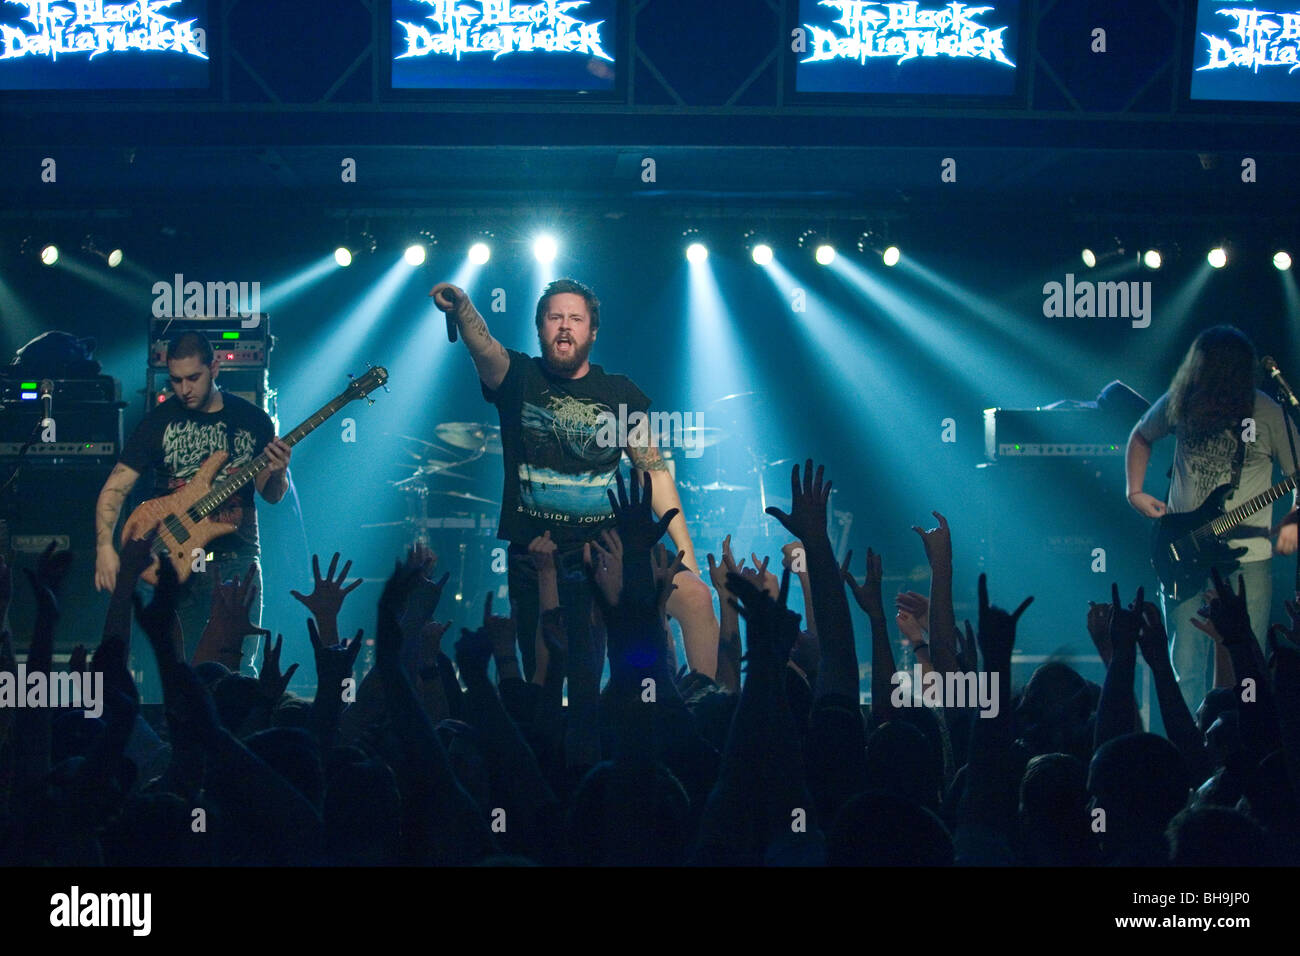 BUDAPEST - JANUARY 18: USA Death Metal Band called The  Black Dahlia Murders performs on stage at Diesel Club Stock Photo